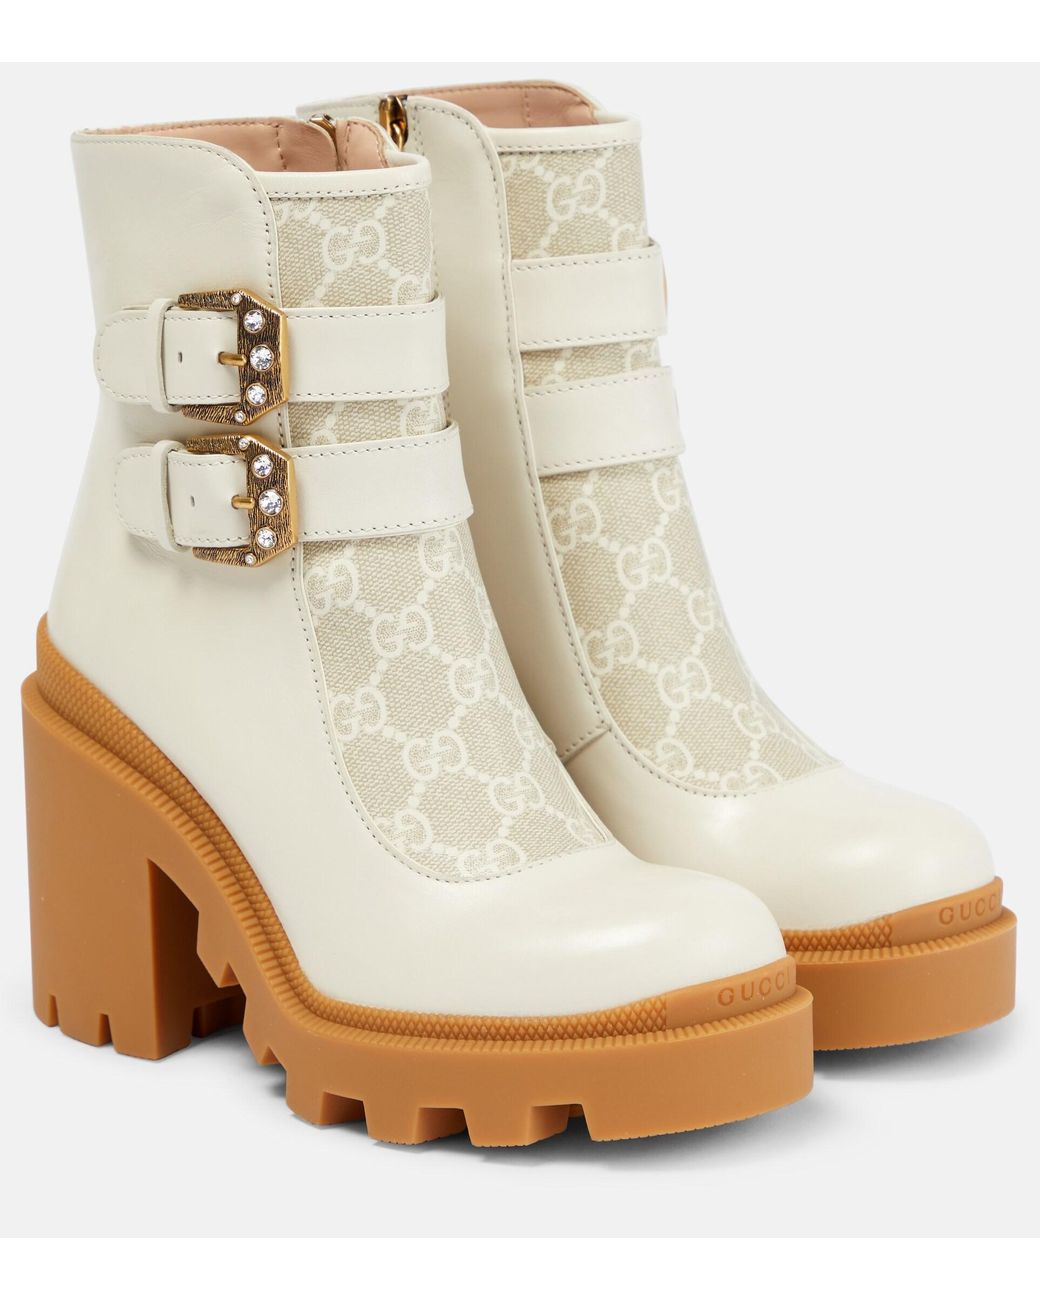 Gucci GG Canvas And Leather Ankle Boots in Natural | Lyst